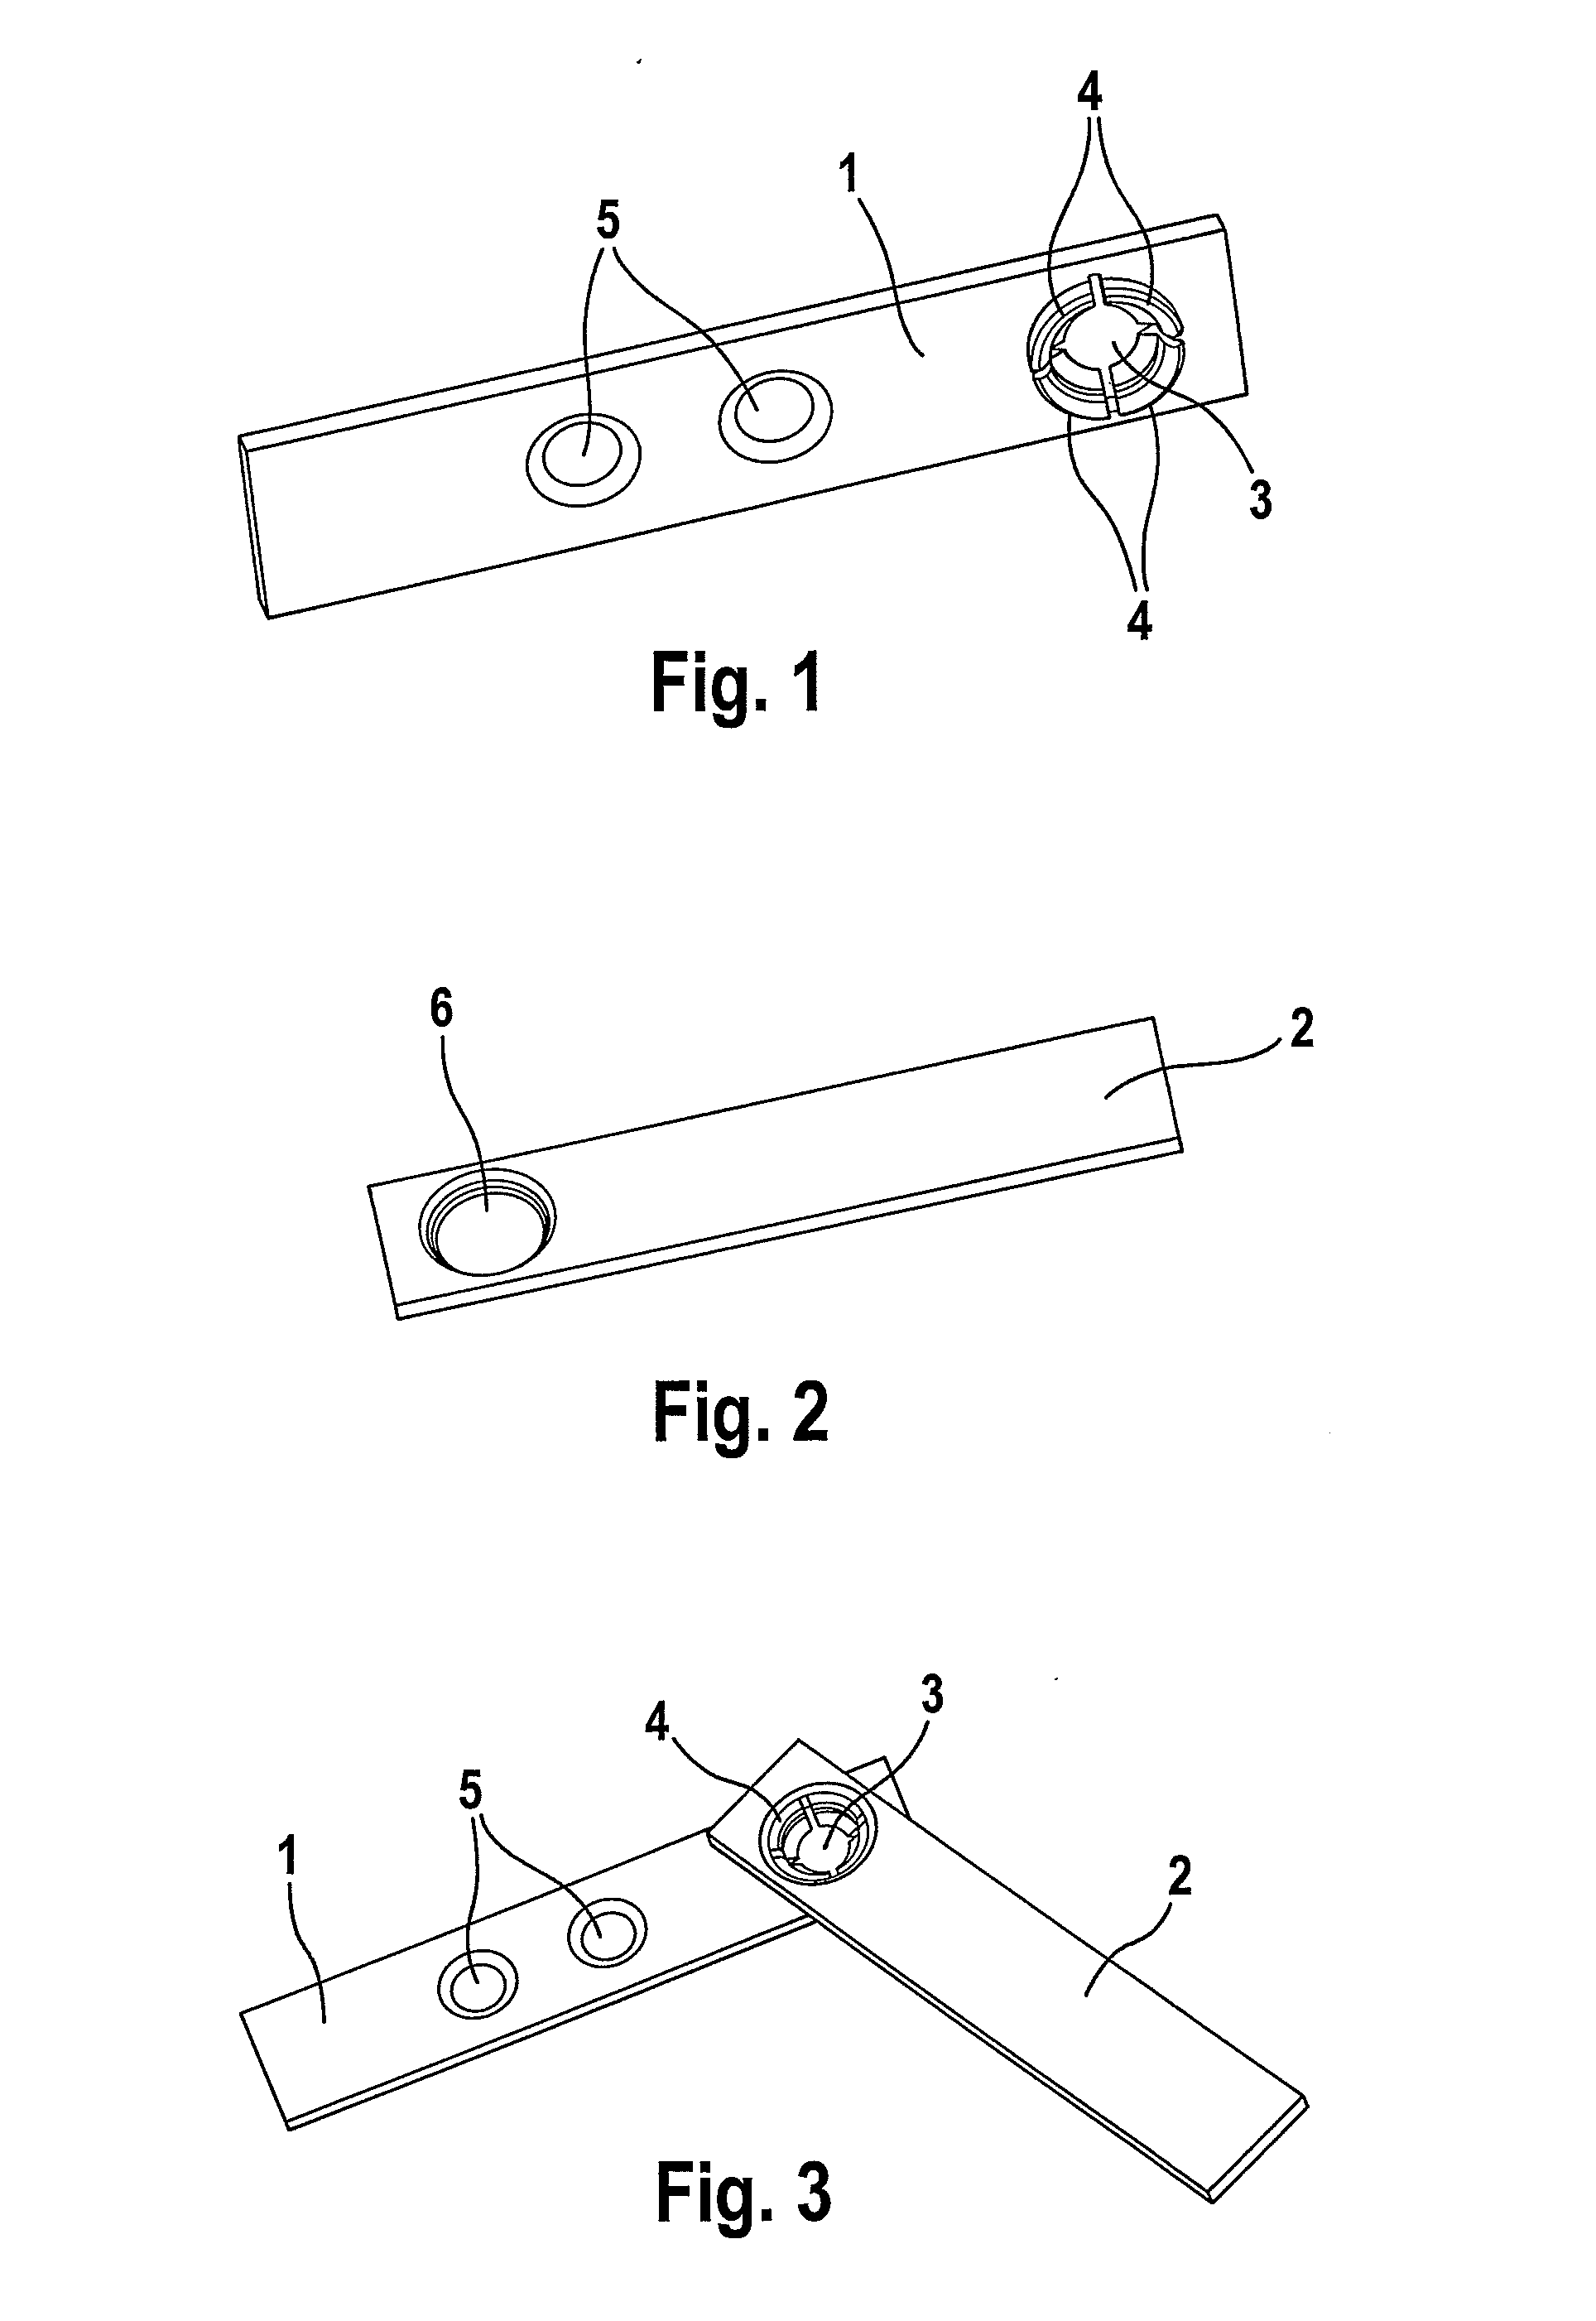 Repositioning and fixation system for bone fragments